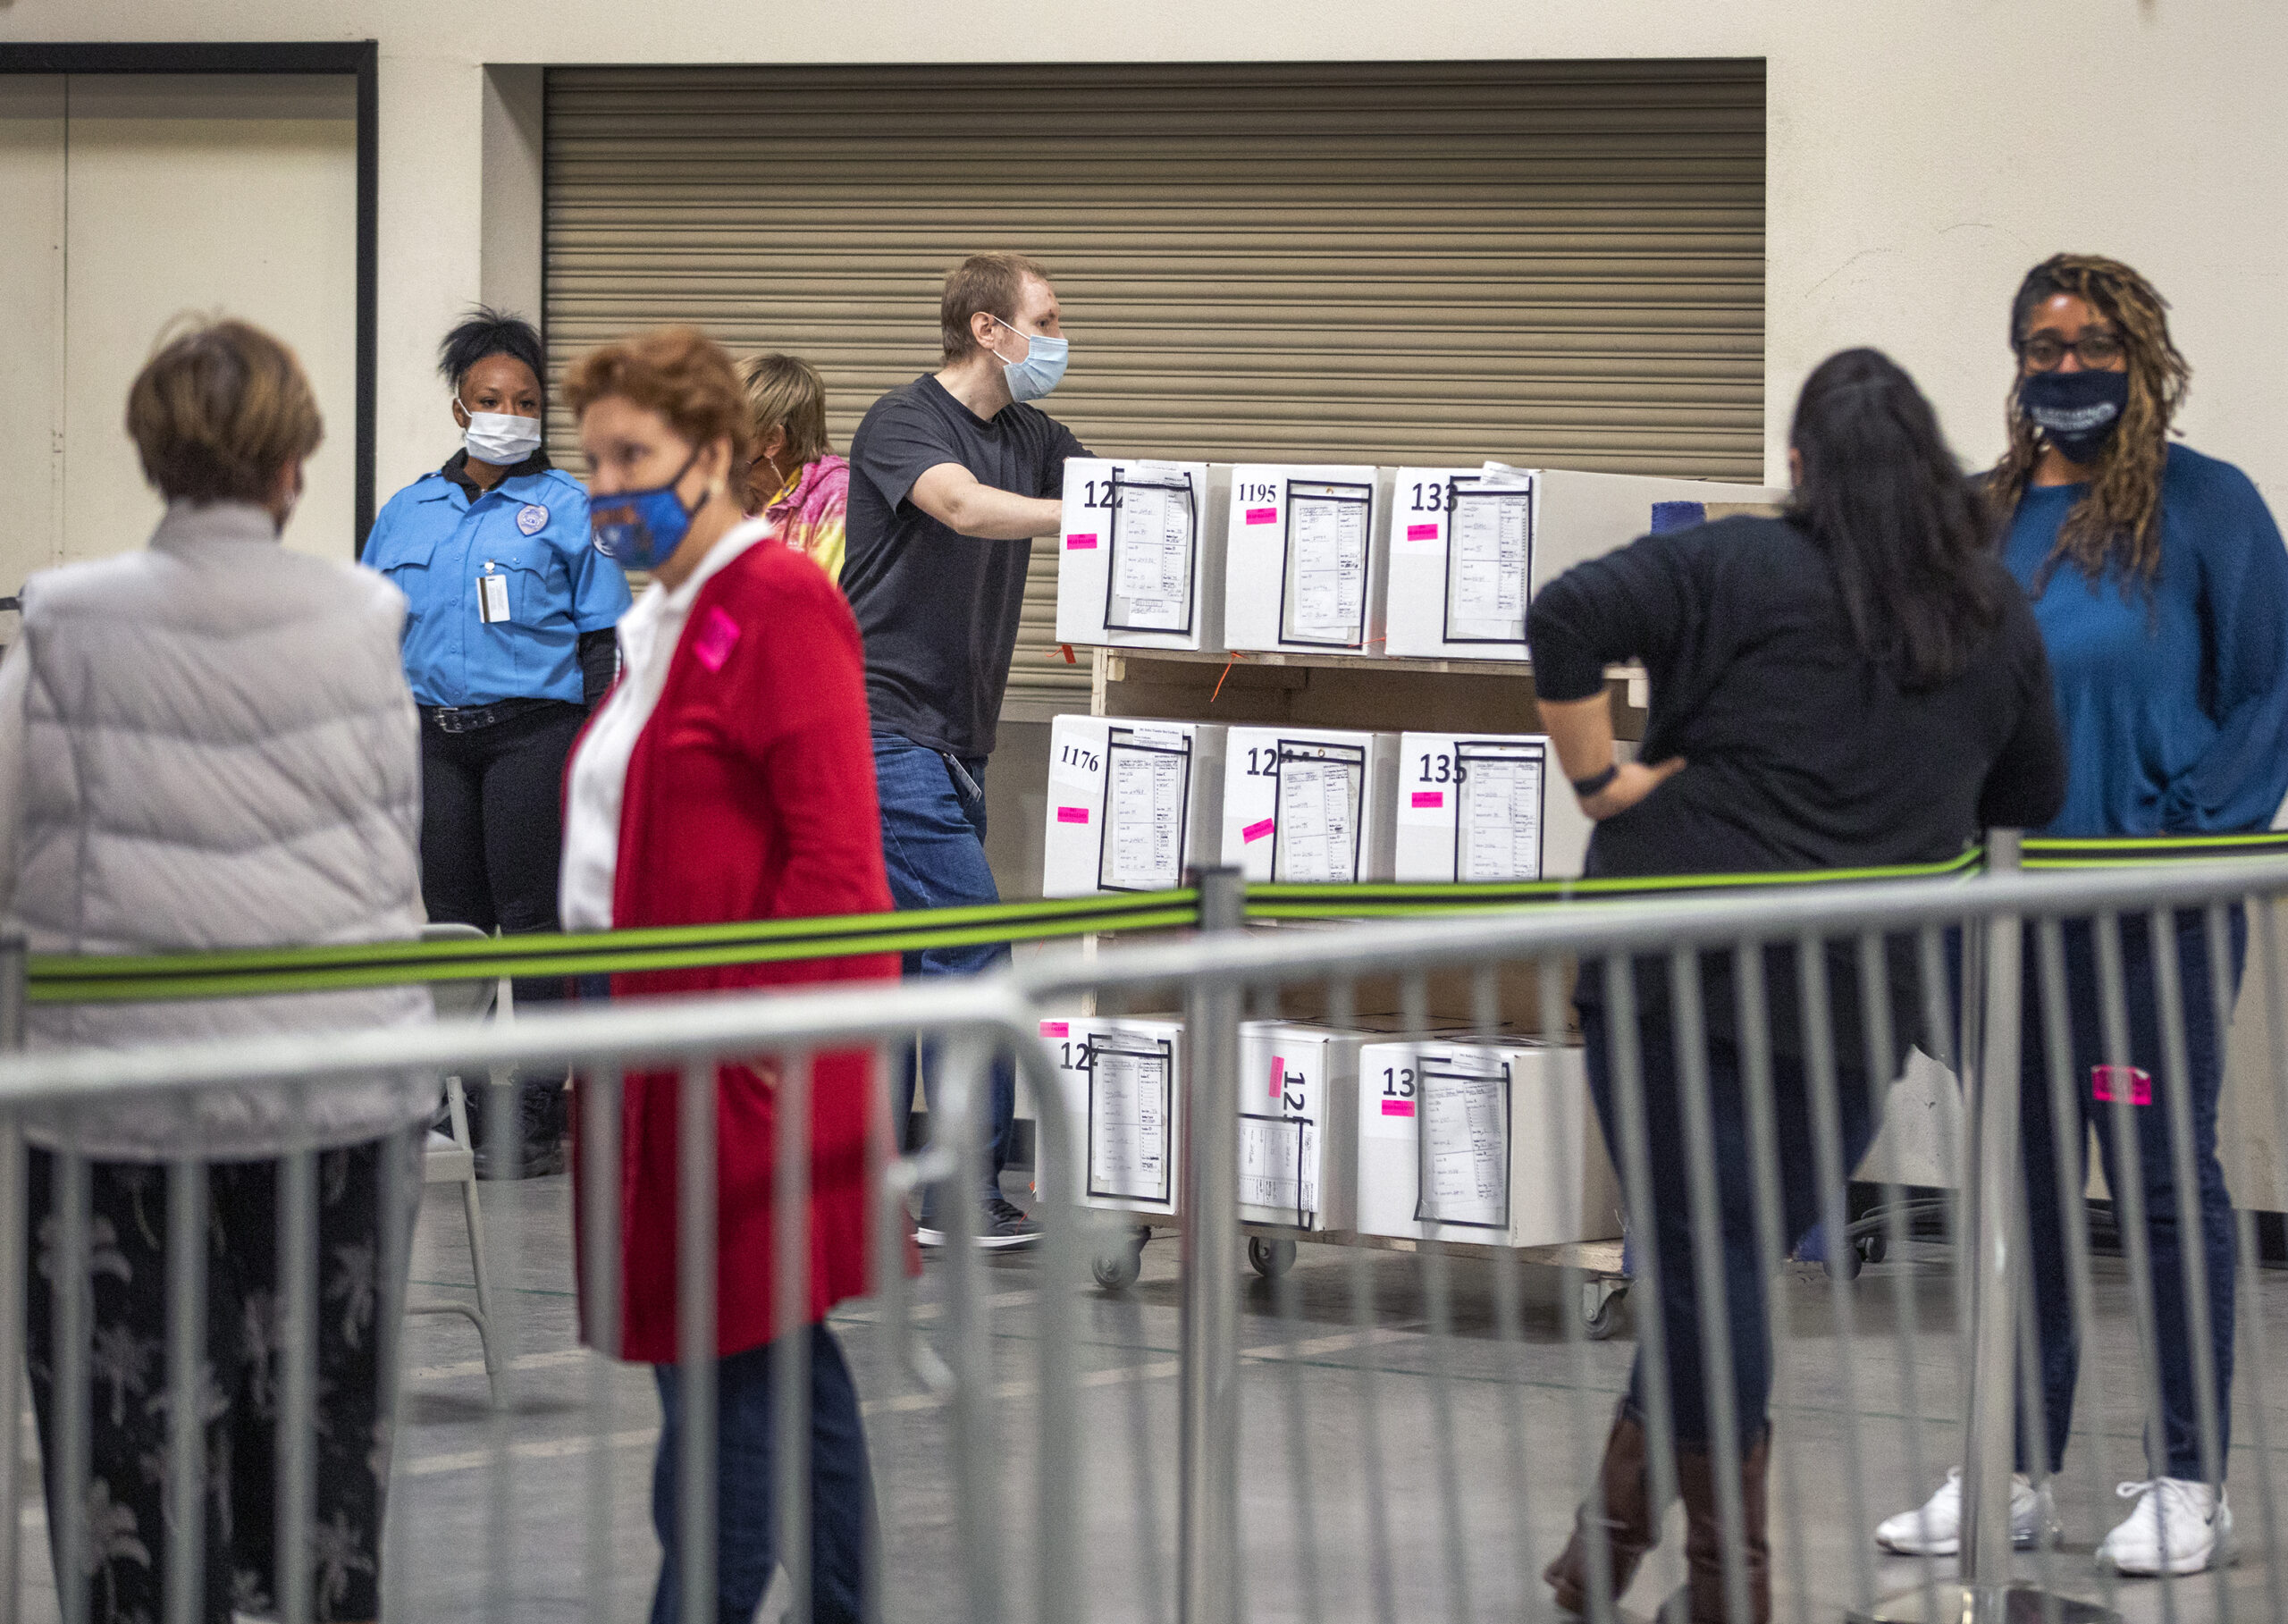 A man pushes a cart full of ballots past observers in the Clark County Election Department on Thursday, Nov. 5, 2020. (Jeff Scheid/The Nevada Independent).